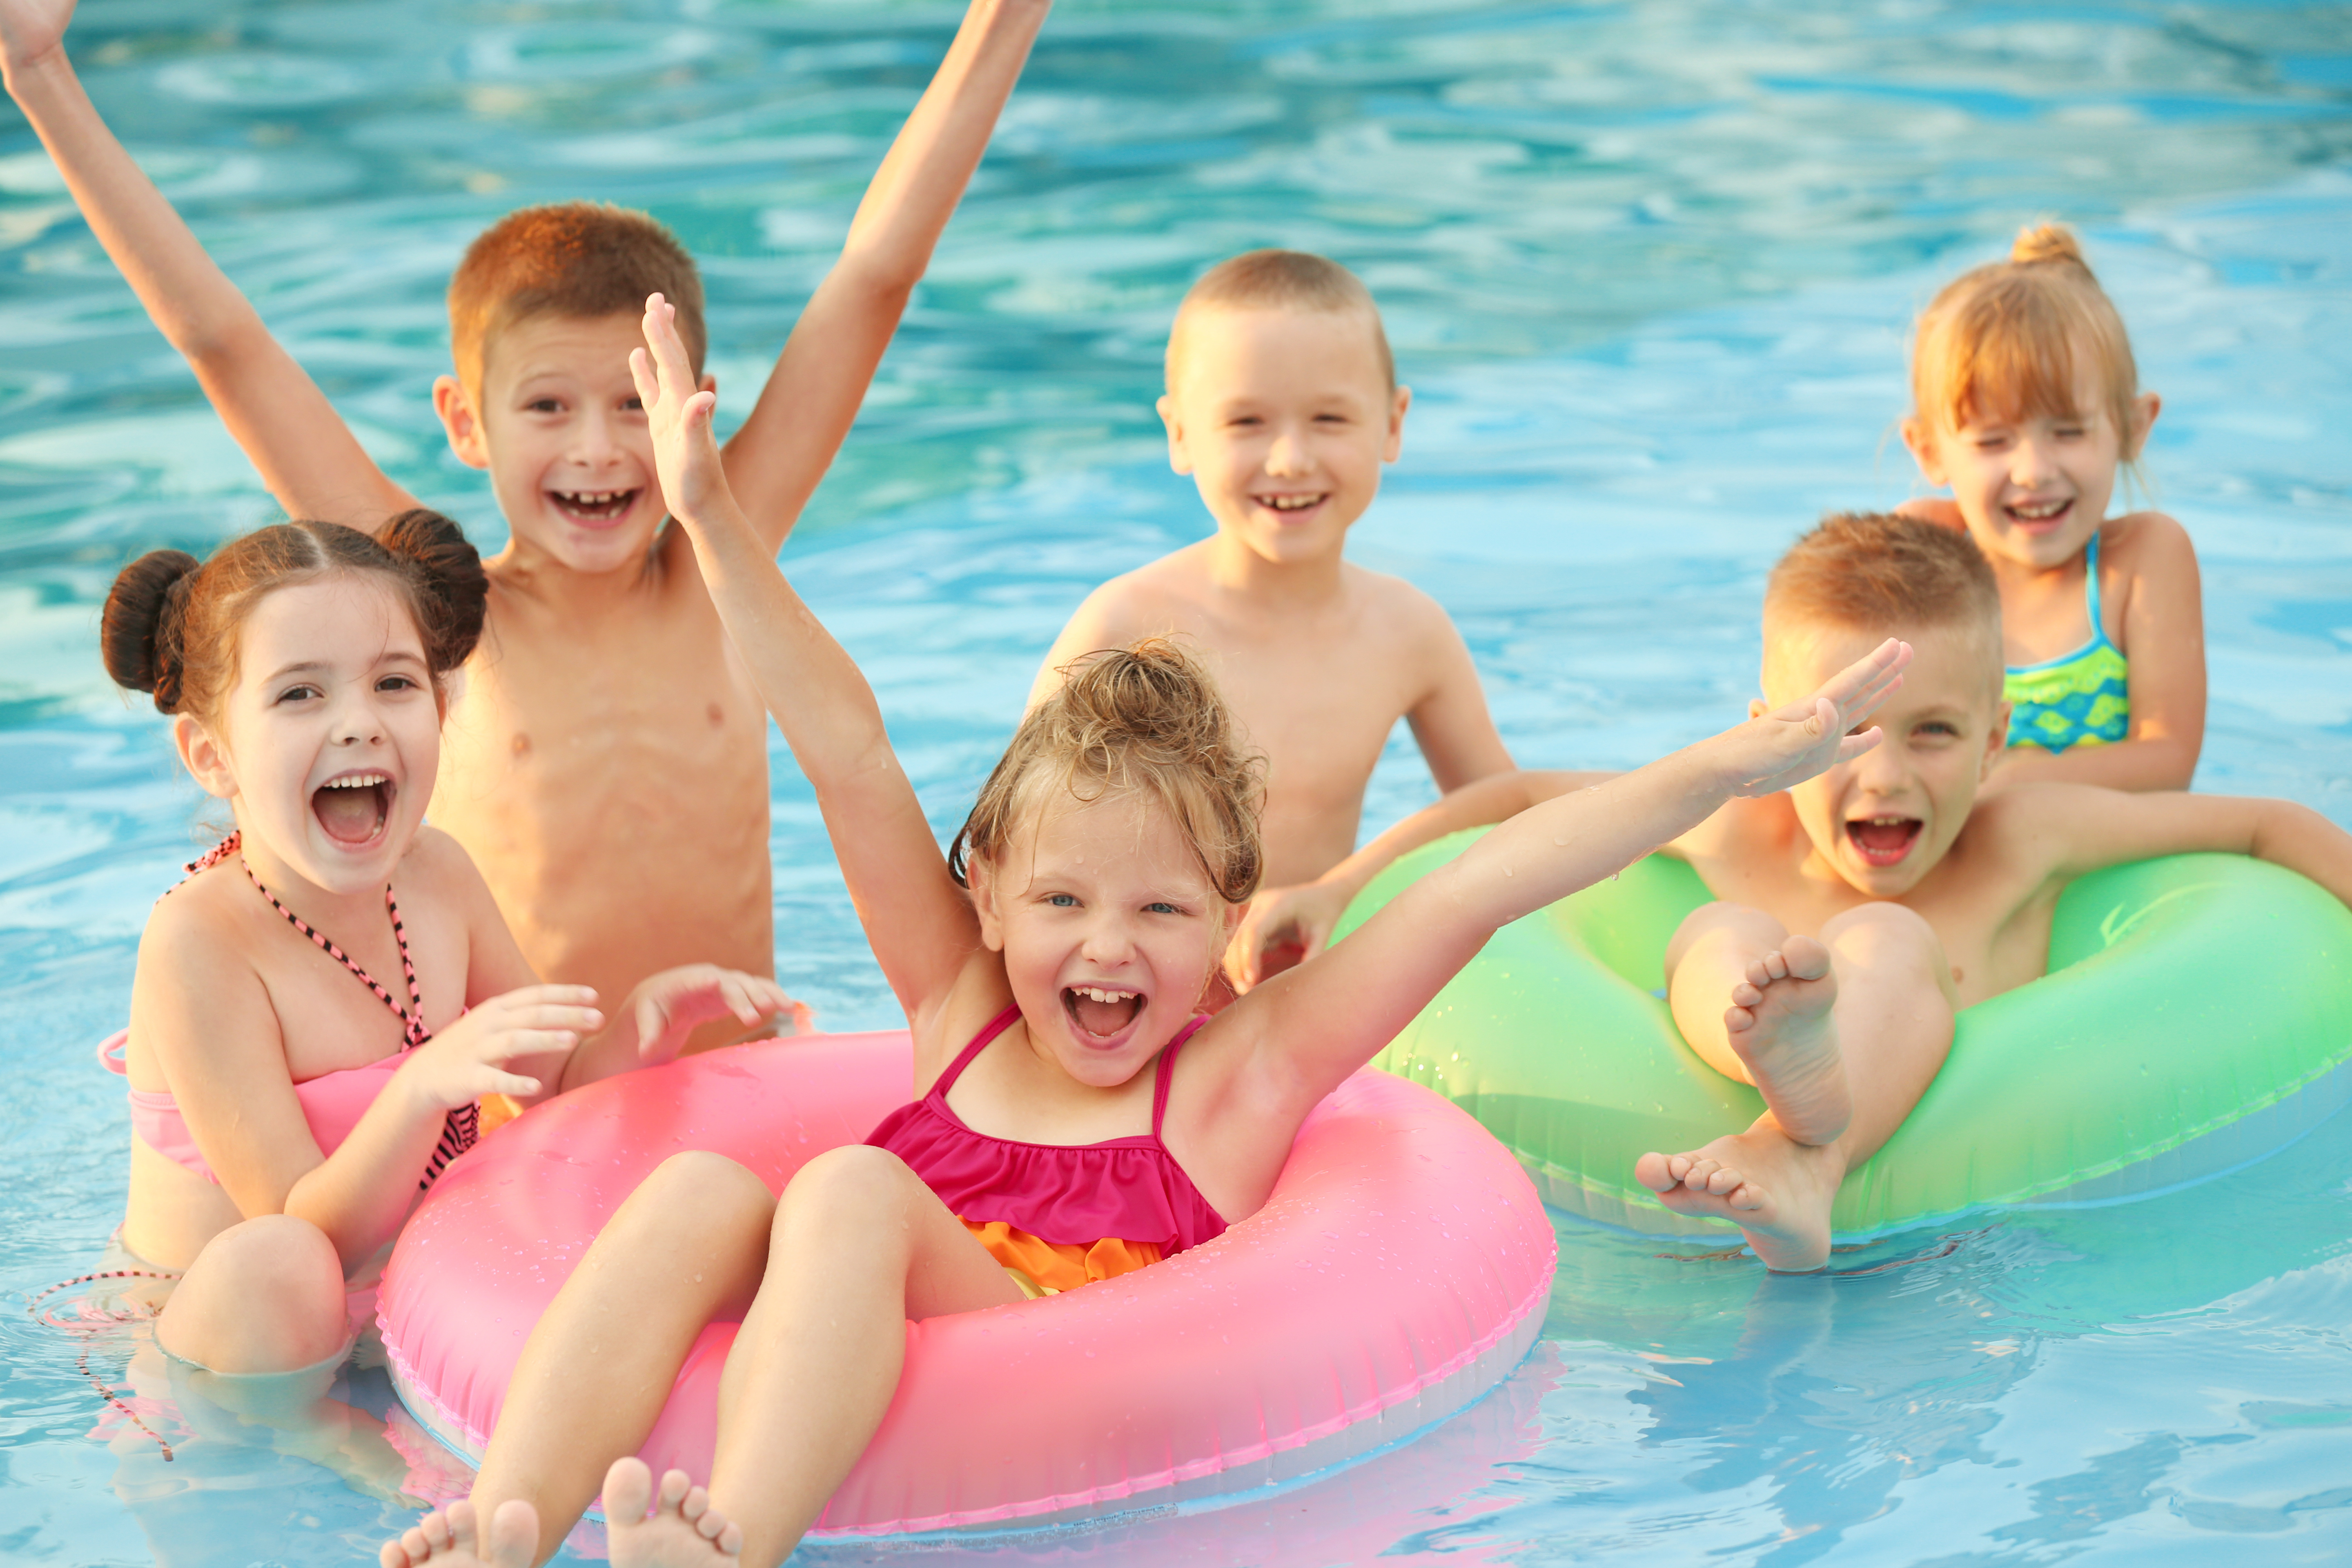 A group of children having fun at a water party.